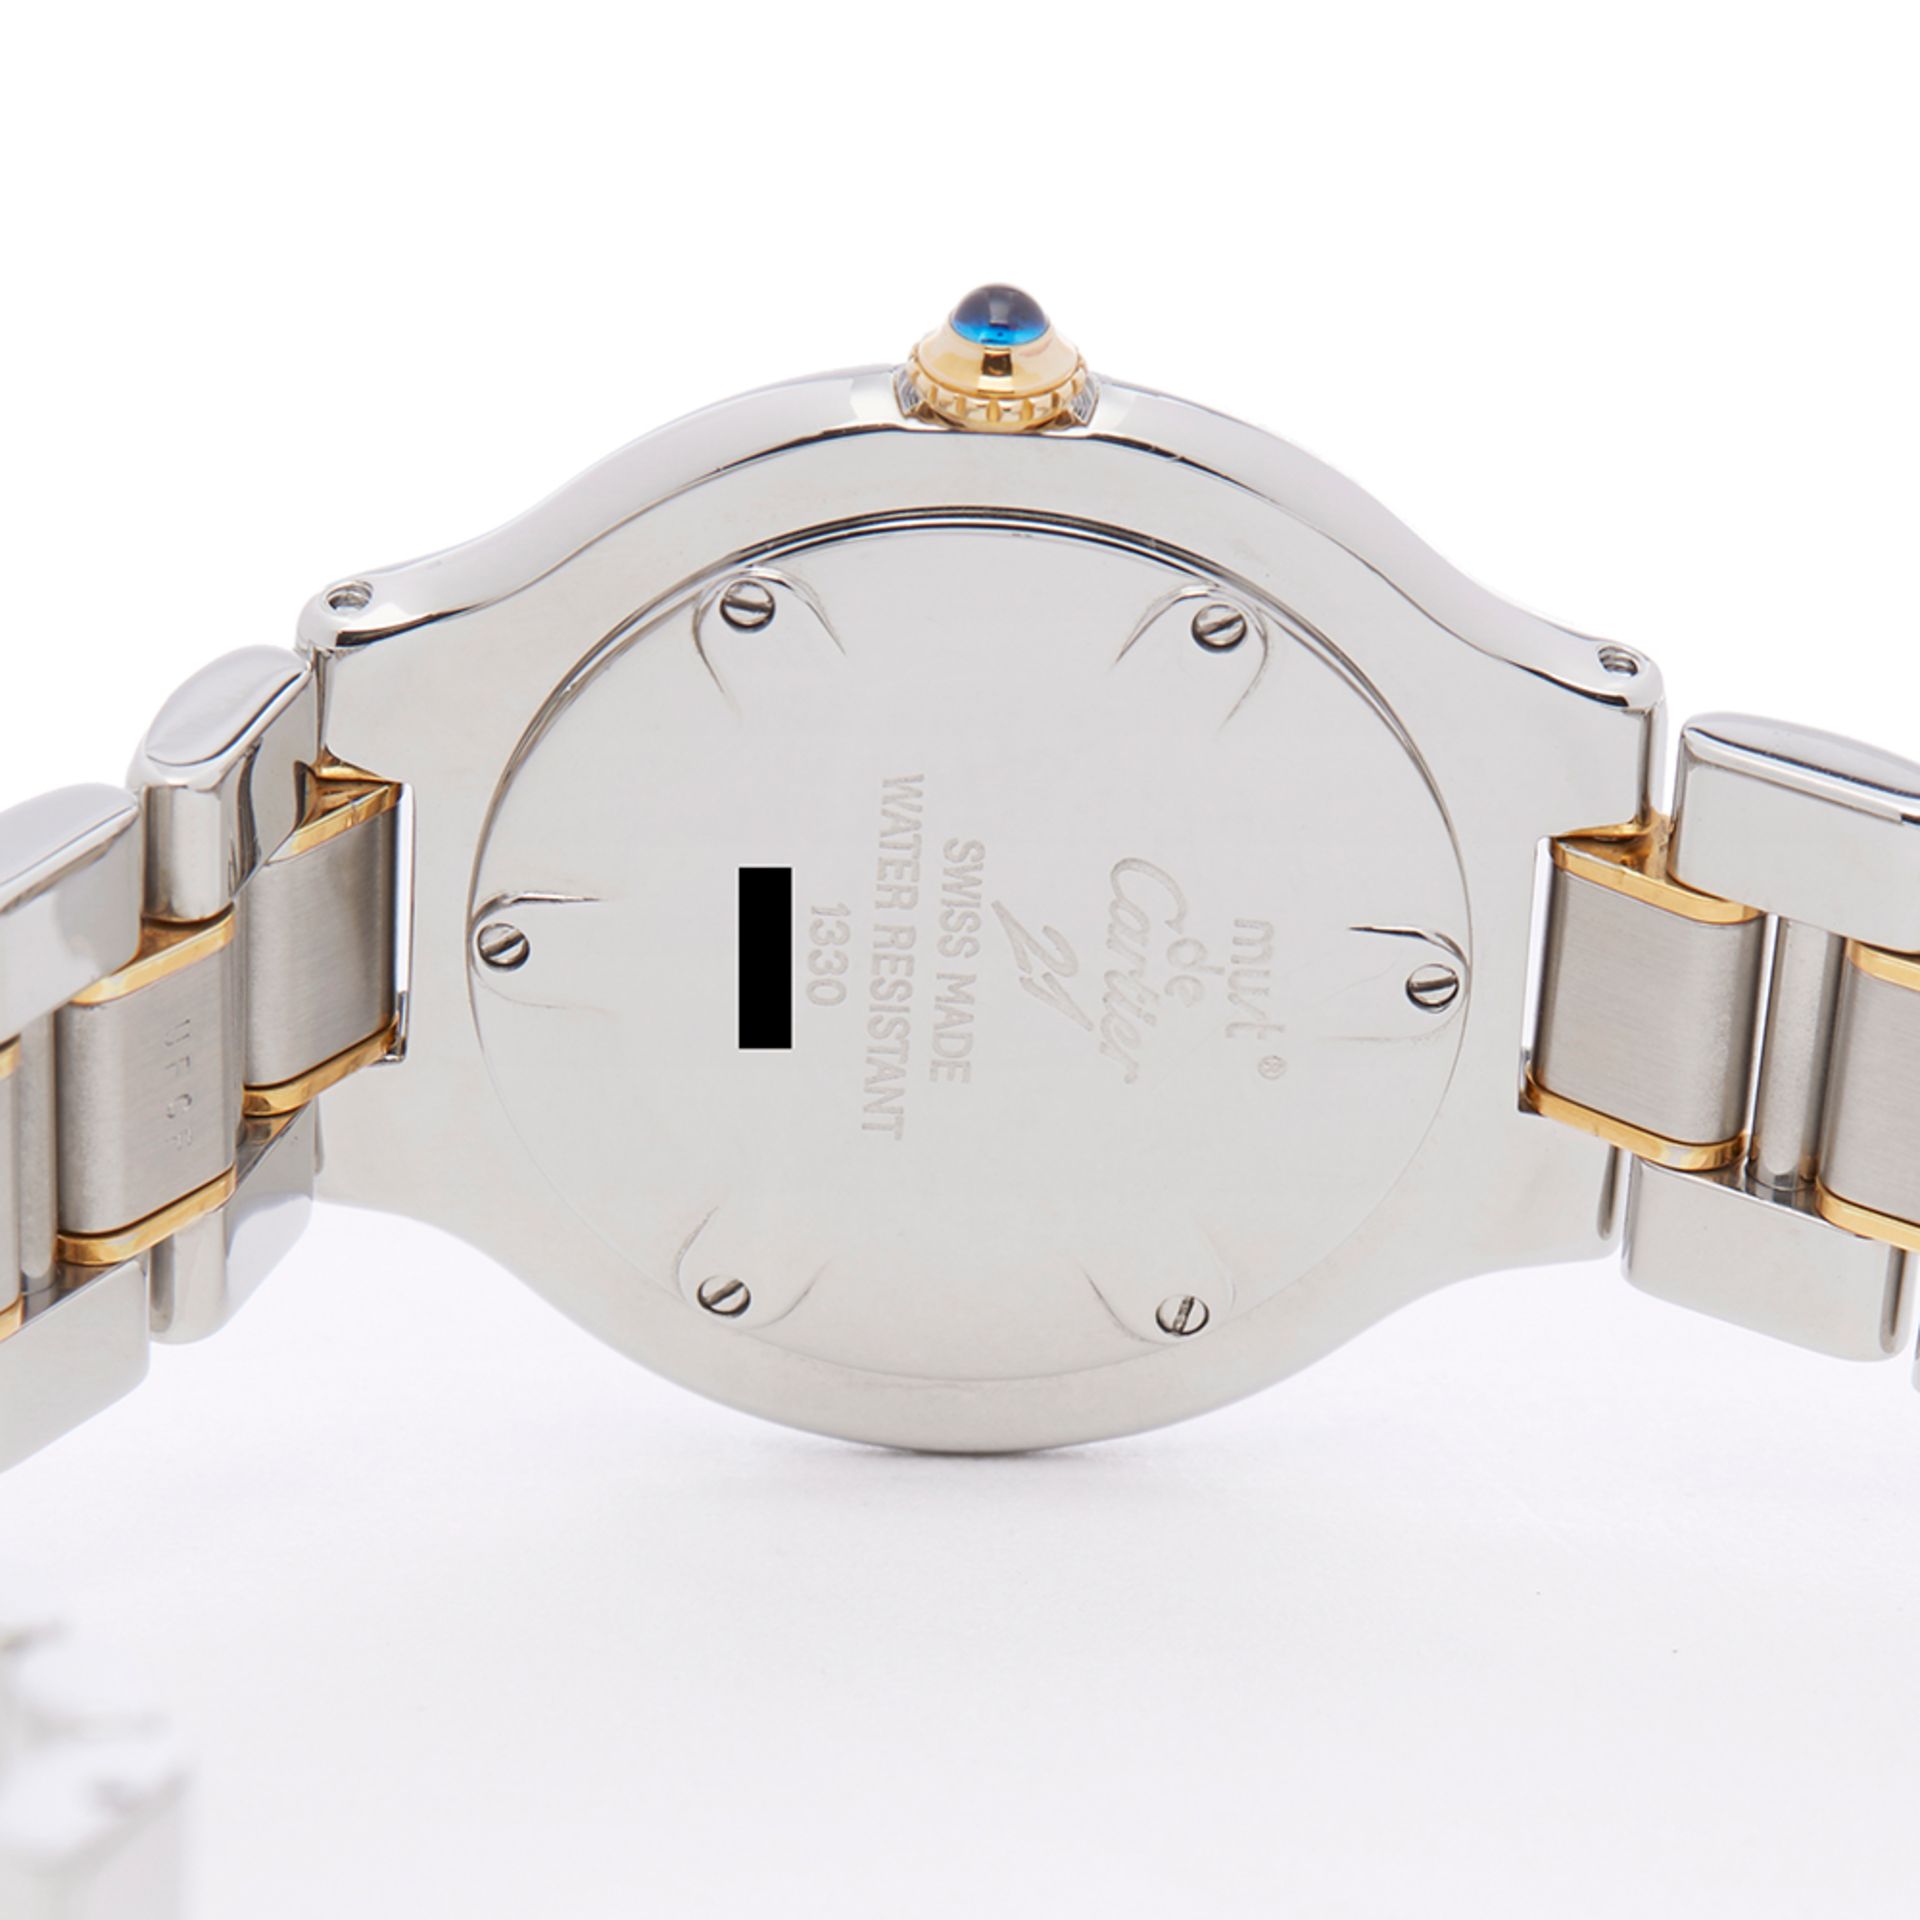 Cartier Must de 21 21 Stainless Steel & 18K Yellow Gold - W1007819 - Image 7 of 7